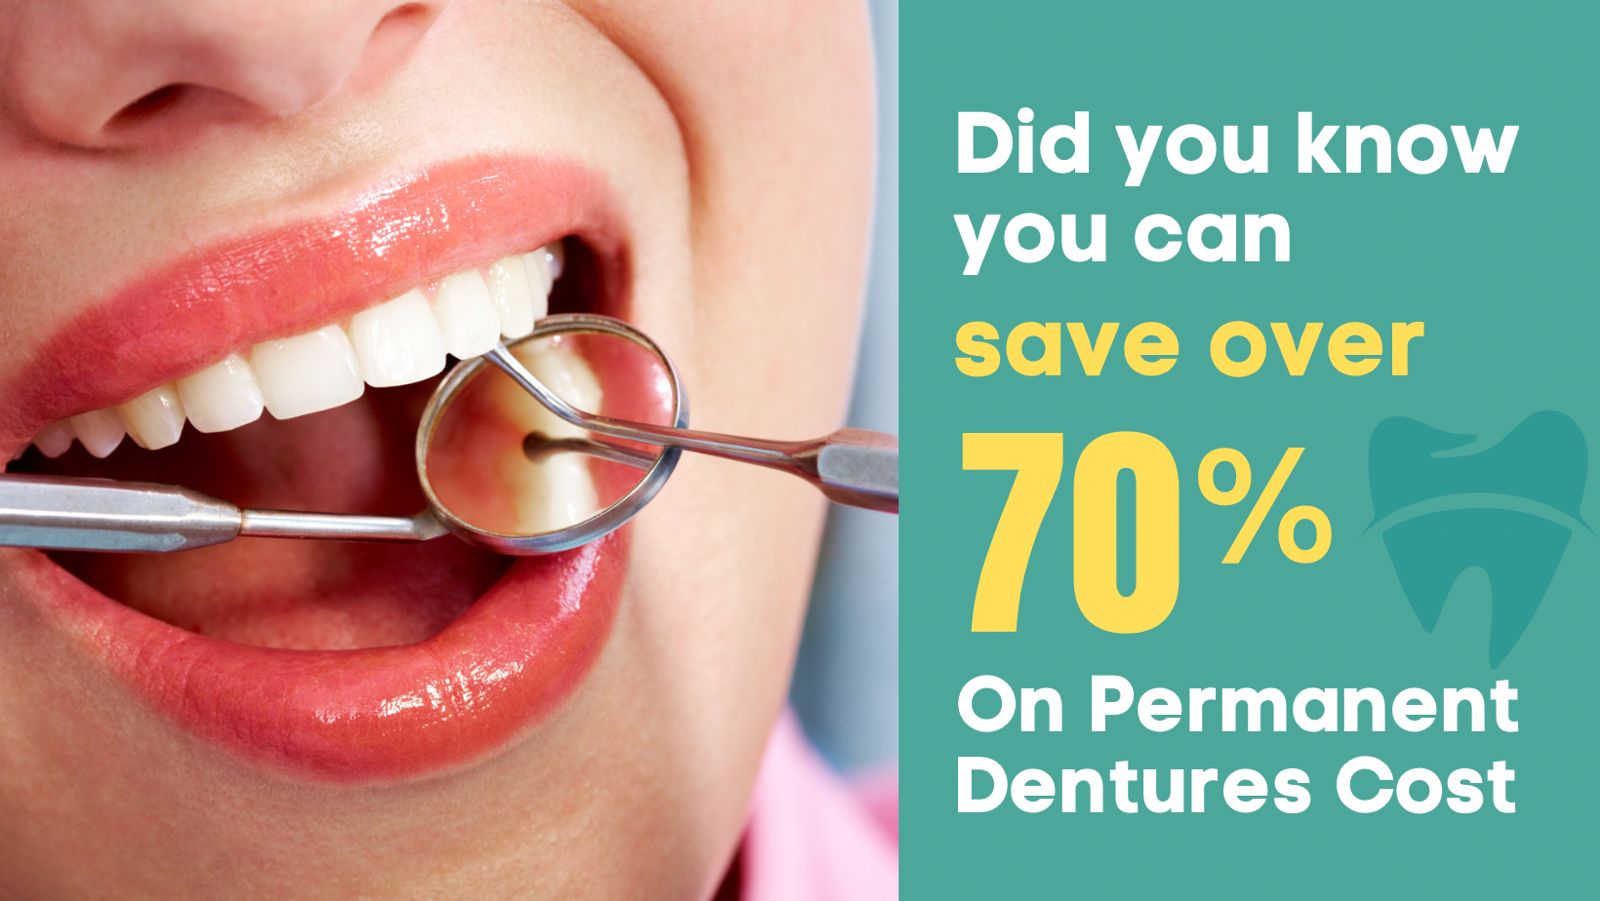 Did you know you can save over 70% on Permanent Dentures Cost